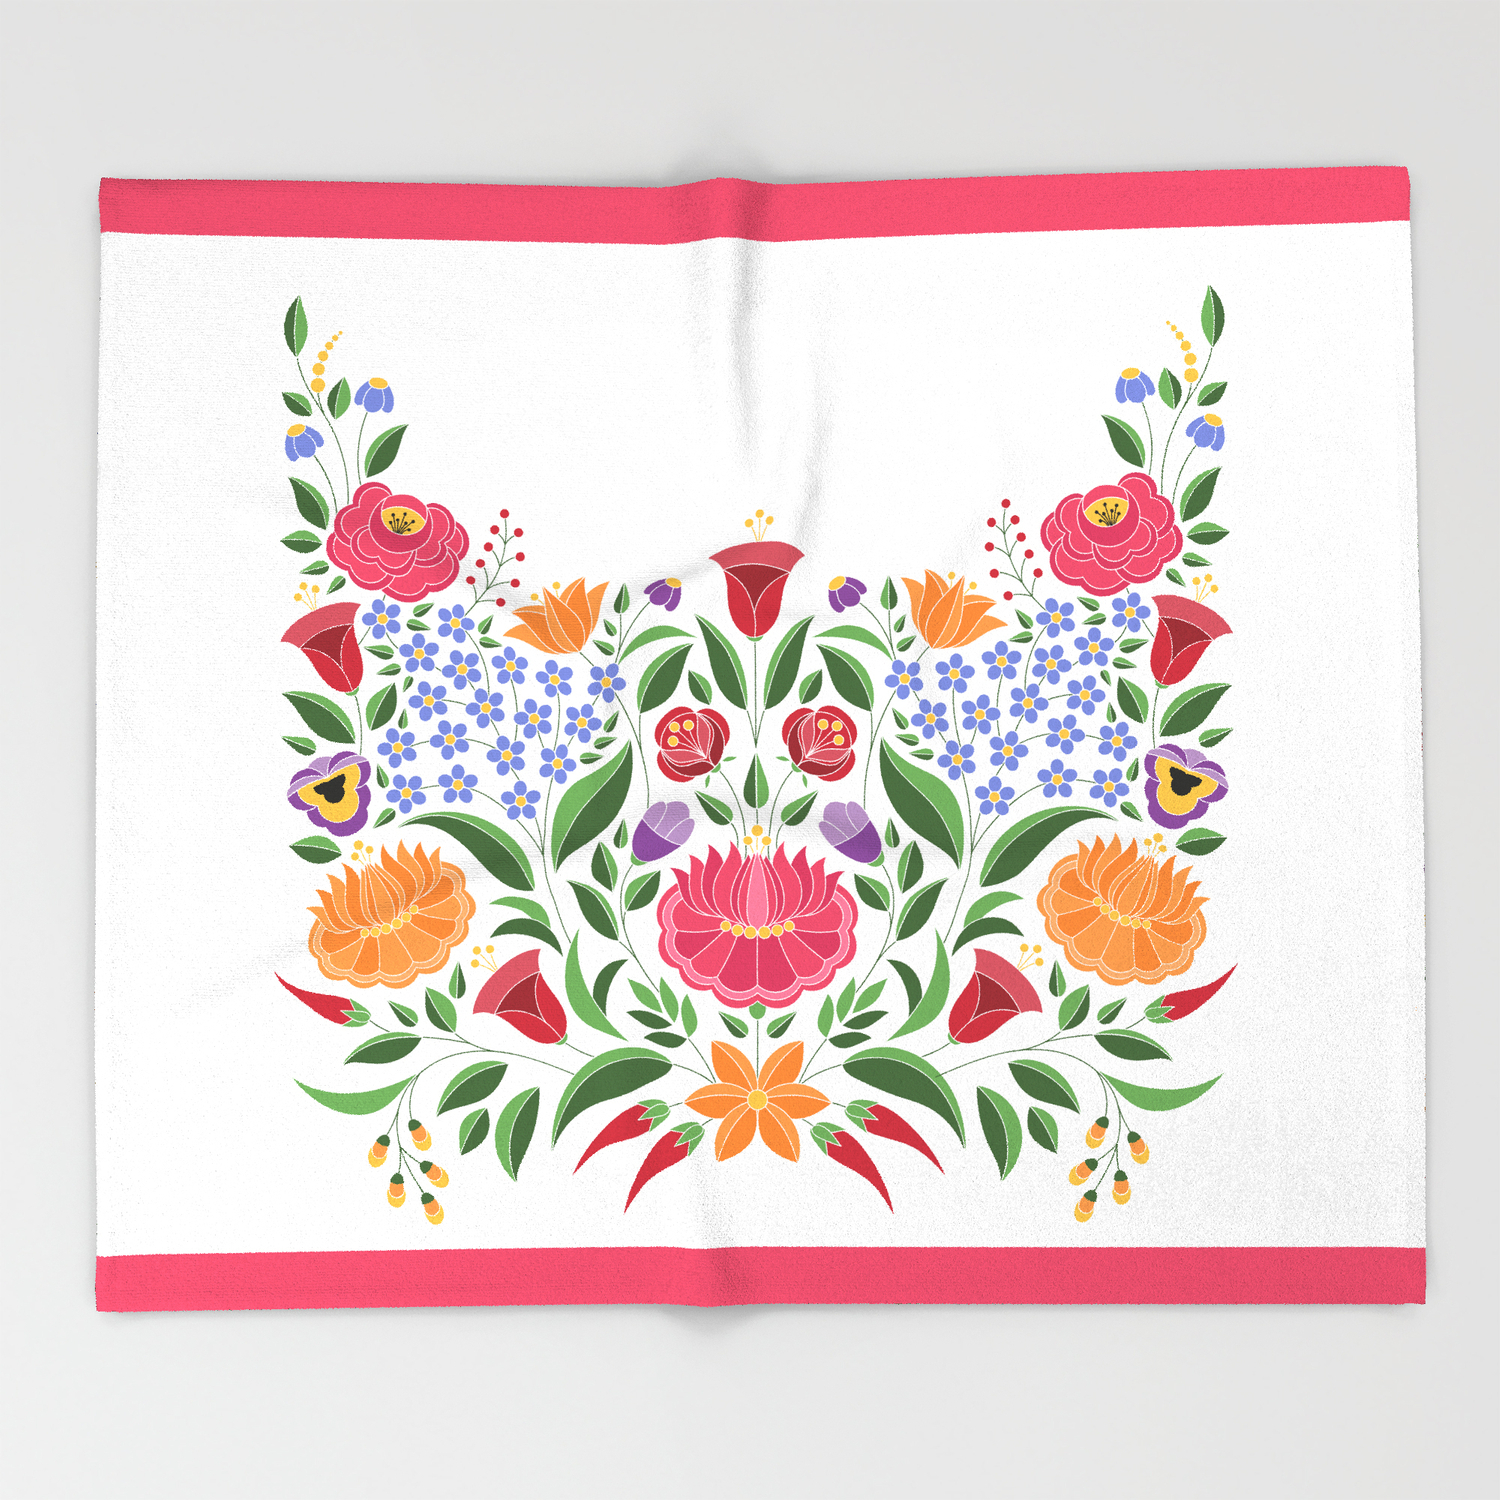 Embroidery Flower Pattern Hungarian Folk Pattern Kalocsa Embroidery Flowers Throw Blanket